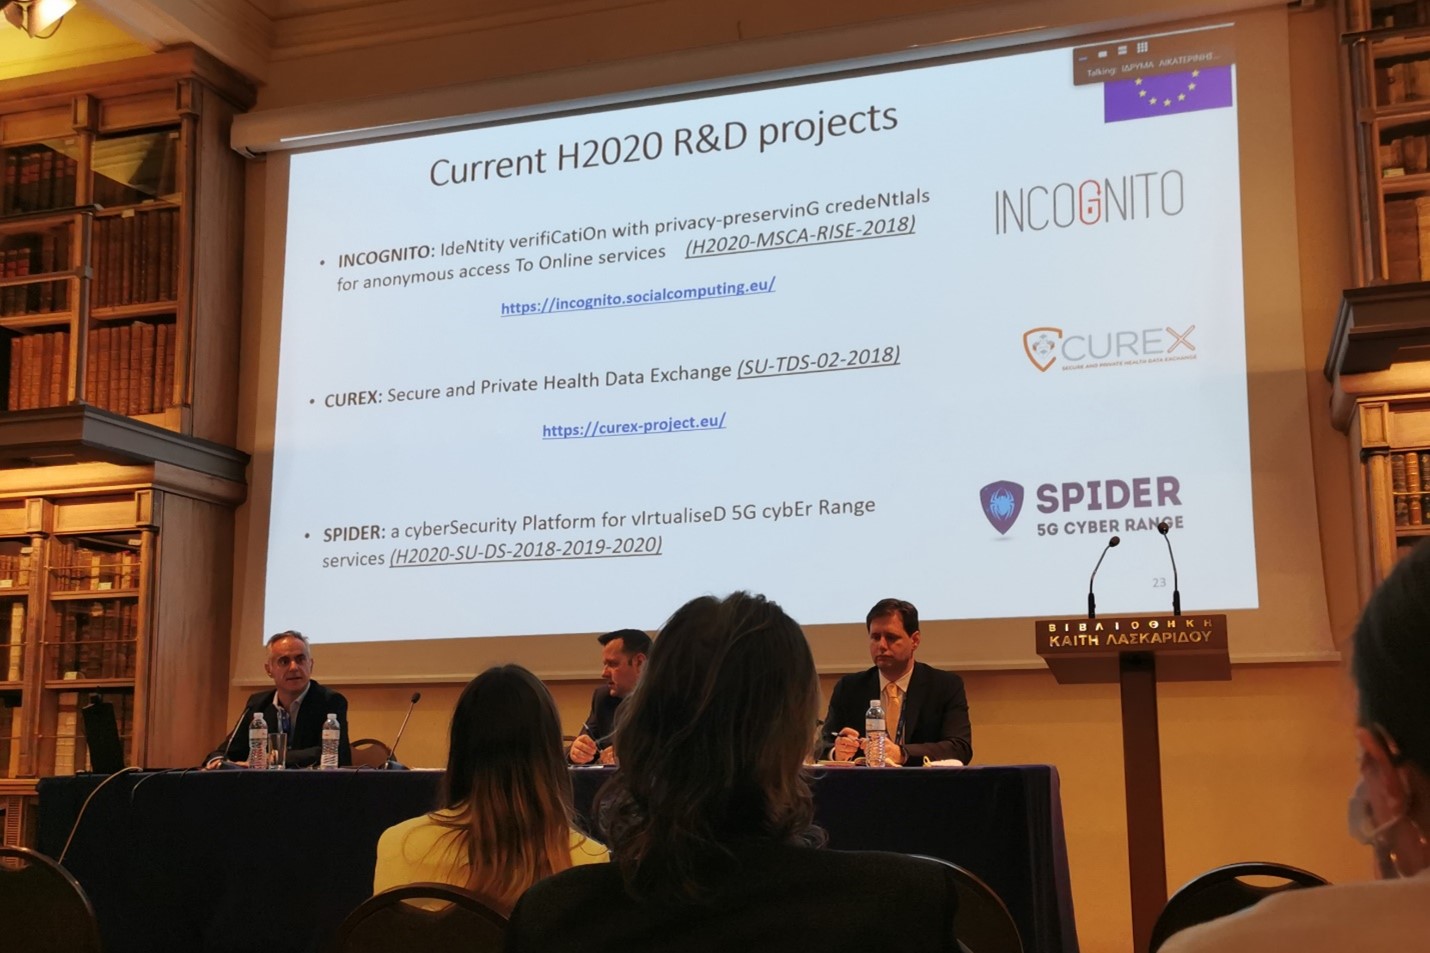 Prof. Christos Xenakis presenting SPIDER at Doctoral School on CSDP Research Methodology Course, organised by the European Security and Defence College (ESDC)